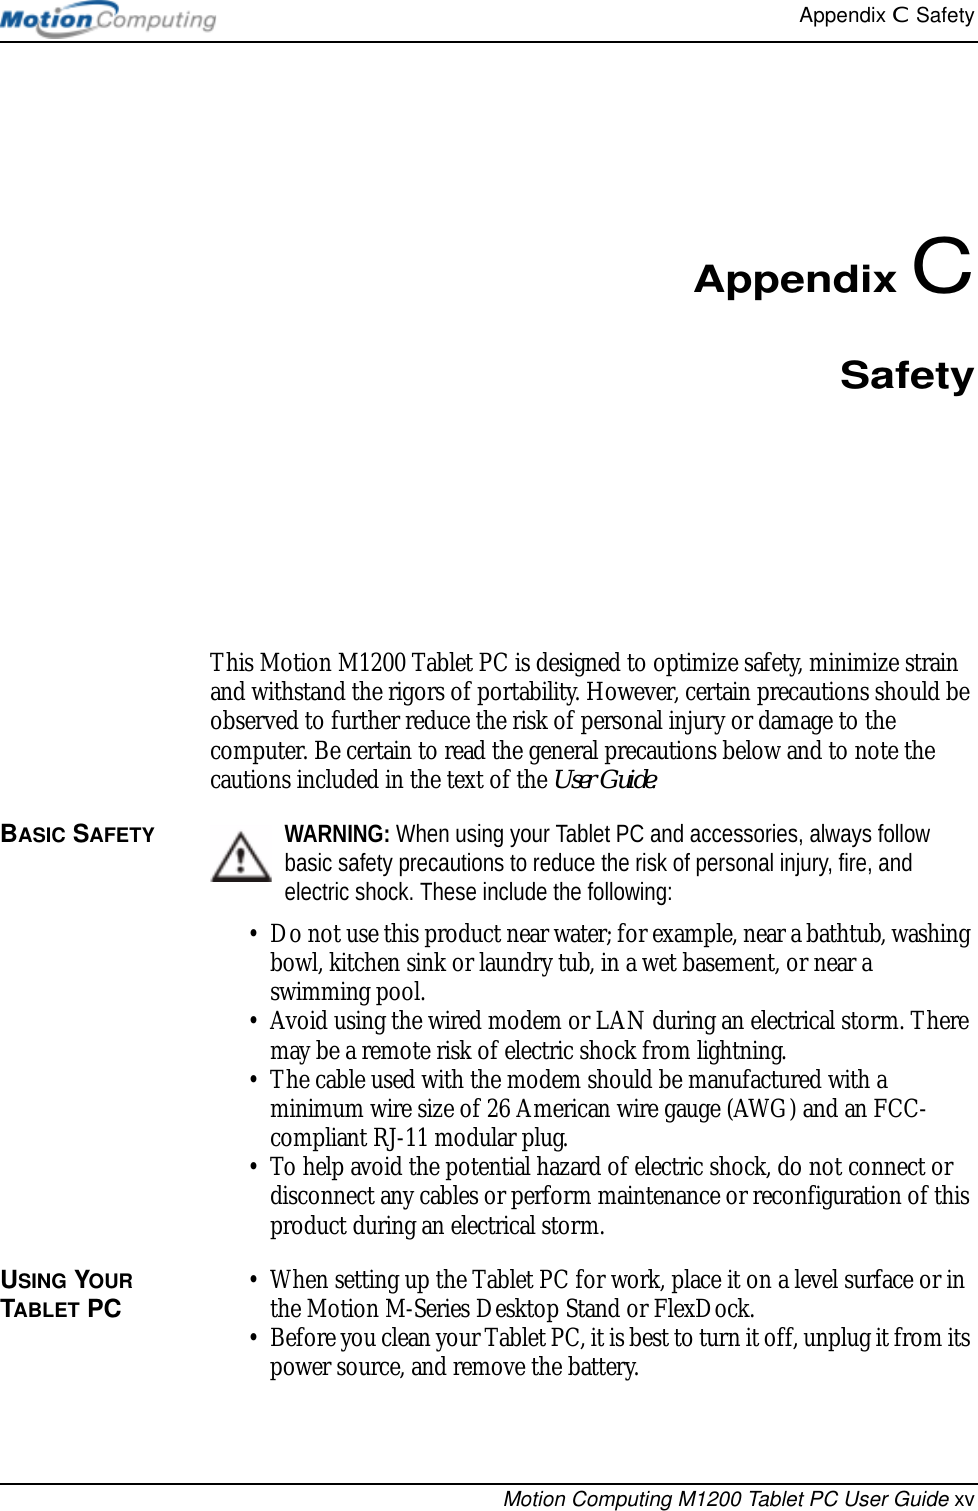 Appendix C  SafetyMotion Computing M1200 Tablet PC User Guide xvAppendix CSafetyThis Motion M1200 Tablet PC is designed to optimize safety, minimize strain and withstand the rigors of portability. However, certain precautions should be observed to further reduce the risk of personal injury or damage to the computer. Be certain to read the general precautions below and to note the cautions included in the text of the User Guide.BASIC SAFETY WARNING: When using your Tablet PC and accessories, always follow basic safety precautions to reduce the risk of personal injury, fire, and electric shock. These include the following:• Do not use this product near water; for example, near a bathtub, washing bowl, kitchen sink or laundry tub, in a wet basement, or near a swimming pool.• Avoid using the wired modem or LAN during an electrical storm. There may be a remote risk of electric shock from lightning.• The cable used with the modem should be manufactured with a minimum wire size of 26 American wire gauge (AWG) and an FCC-compliant RJ-11 modular plug.• To help avoid the potential hazard of electric shock, do not connect or disconnect any cables or perform maintenance or reconfiguration of this product during an electrical storm.USING YOUR TABLET PC • When setting up the Tablet PC for work, place it on a level surface or in the Motion M-Series Desktop Stand or FlexDock.• Before you clean your Tablet PC, it is best to turn it off, unplug it from its power source, and remove the battery. 